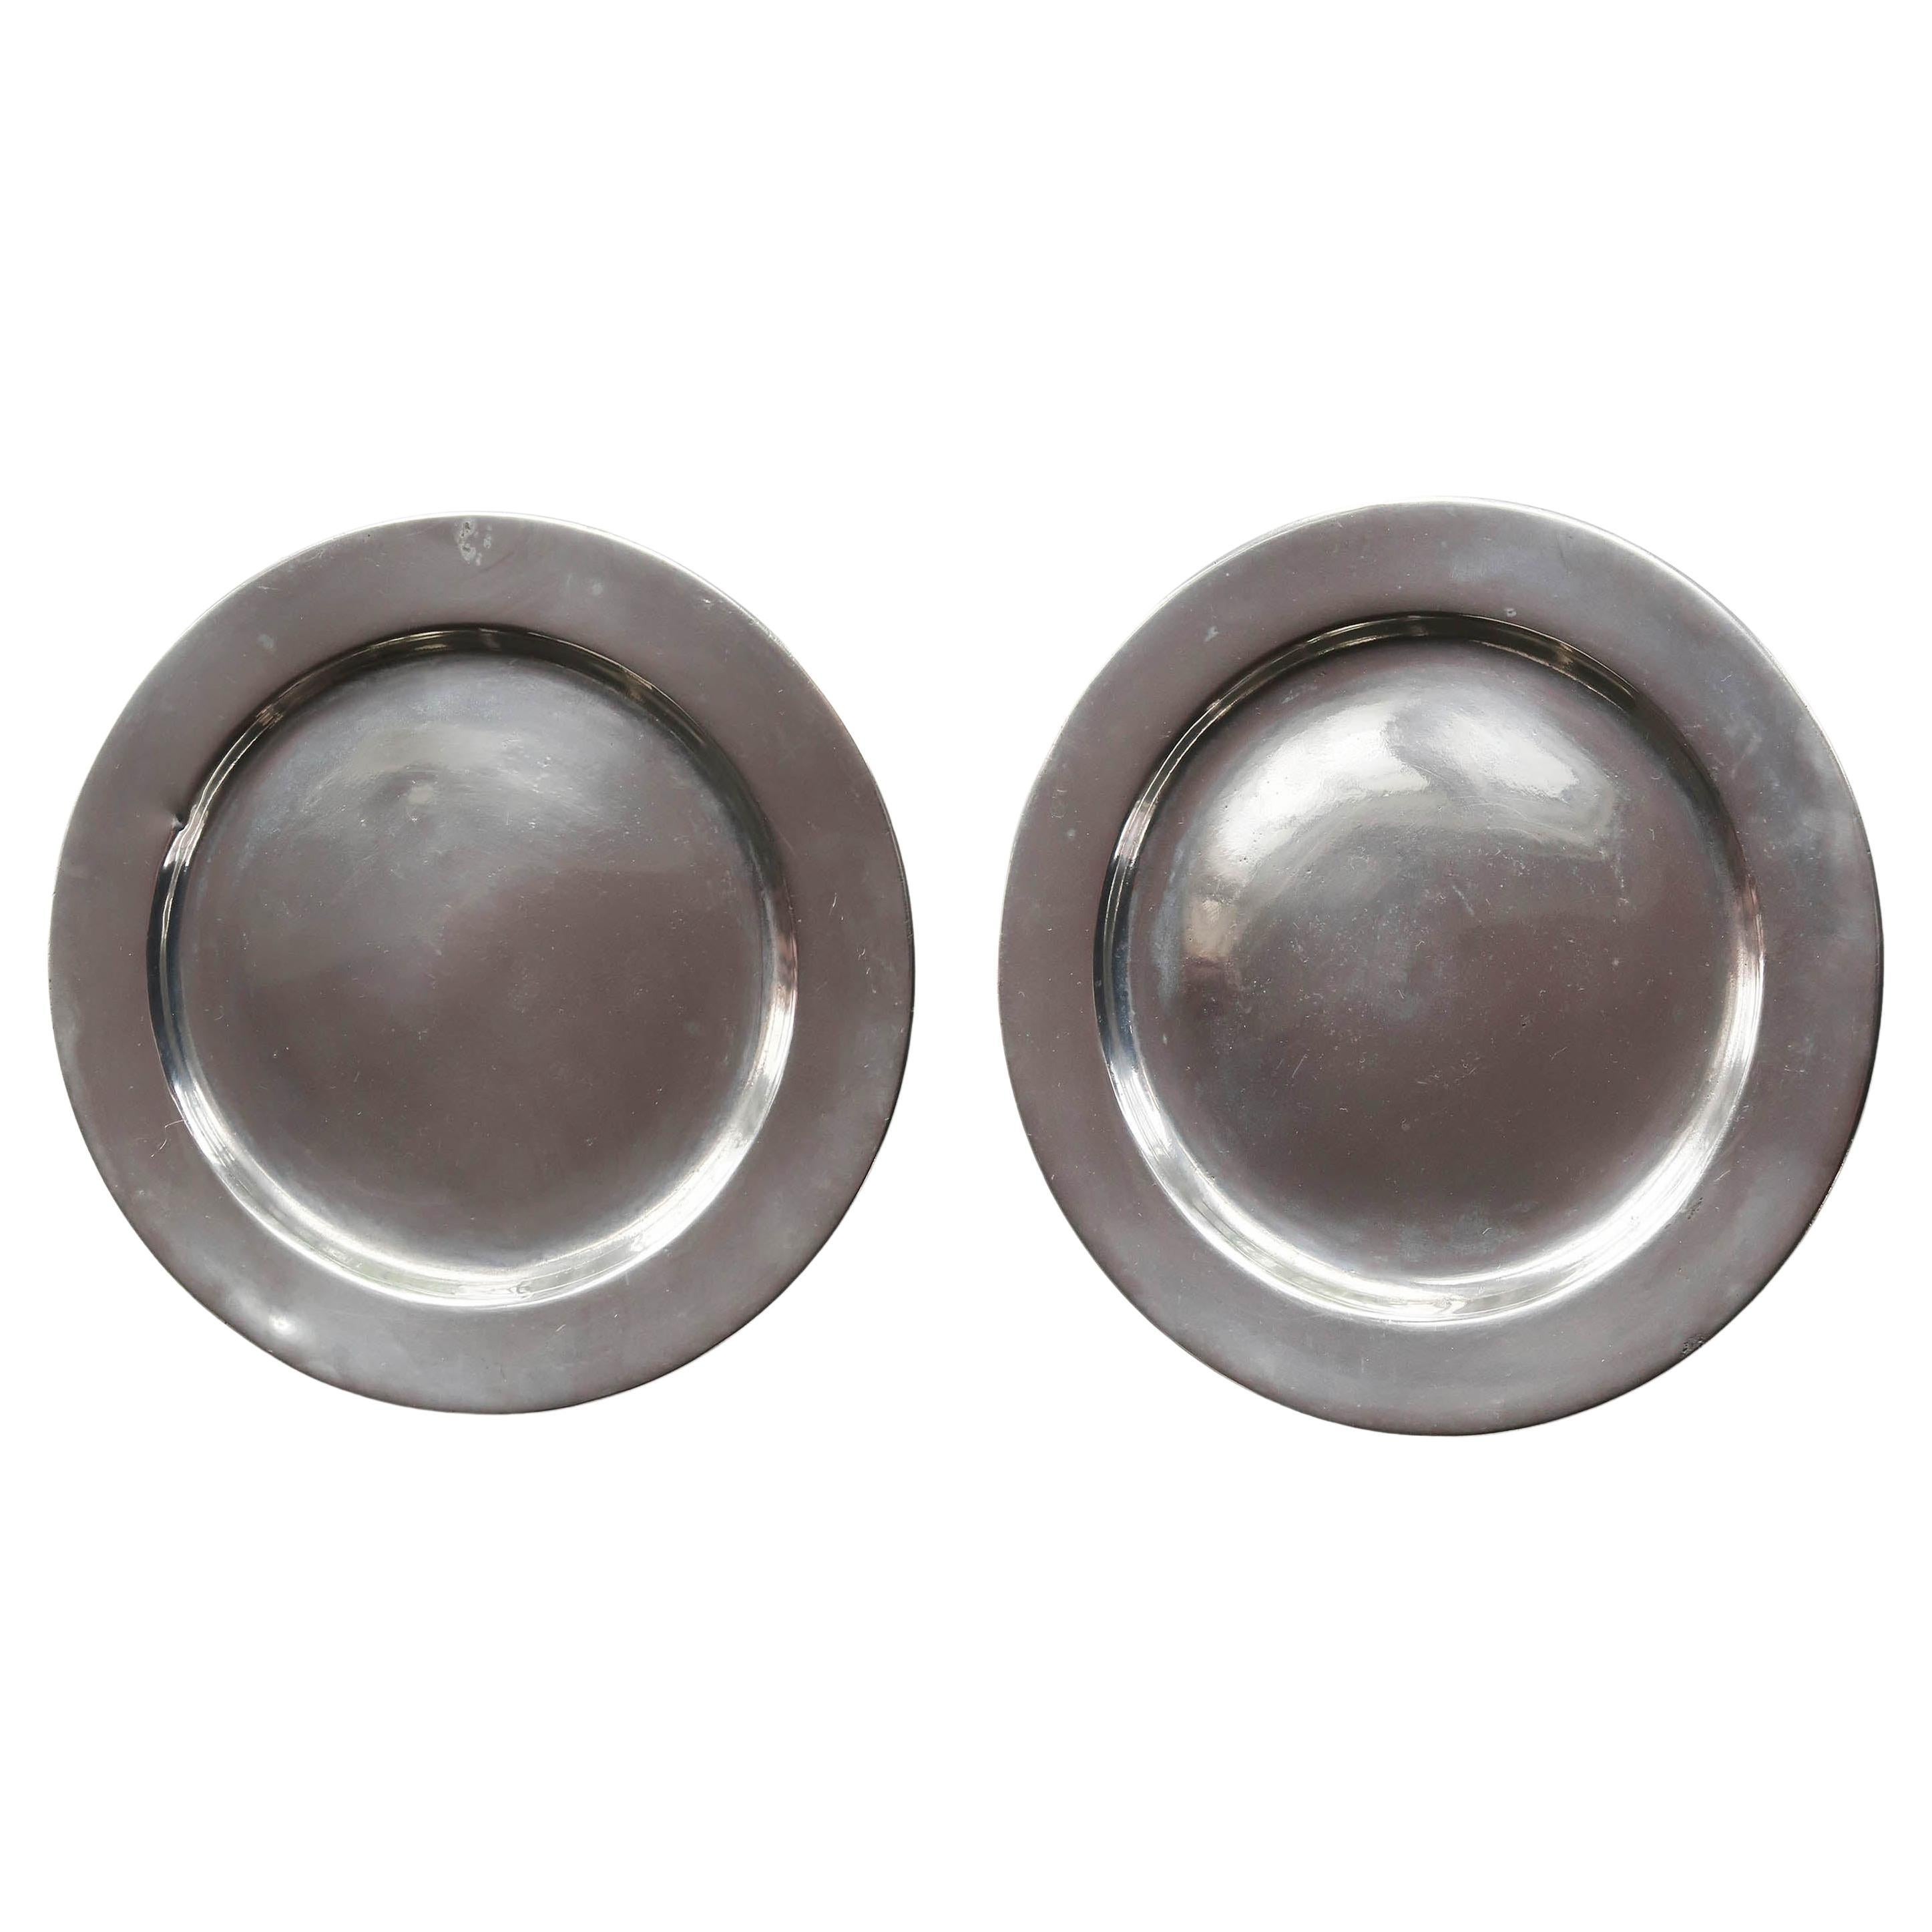 Pair of Antique Brightly Polished Pewter Plates, English, C.1800